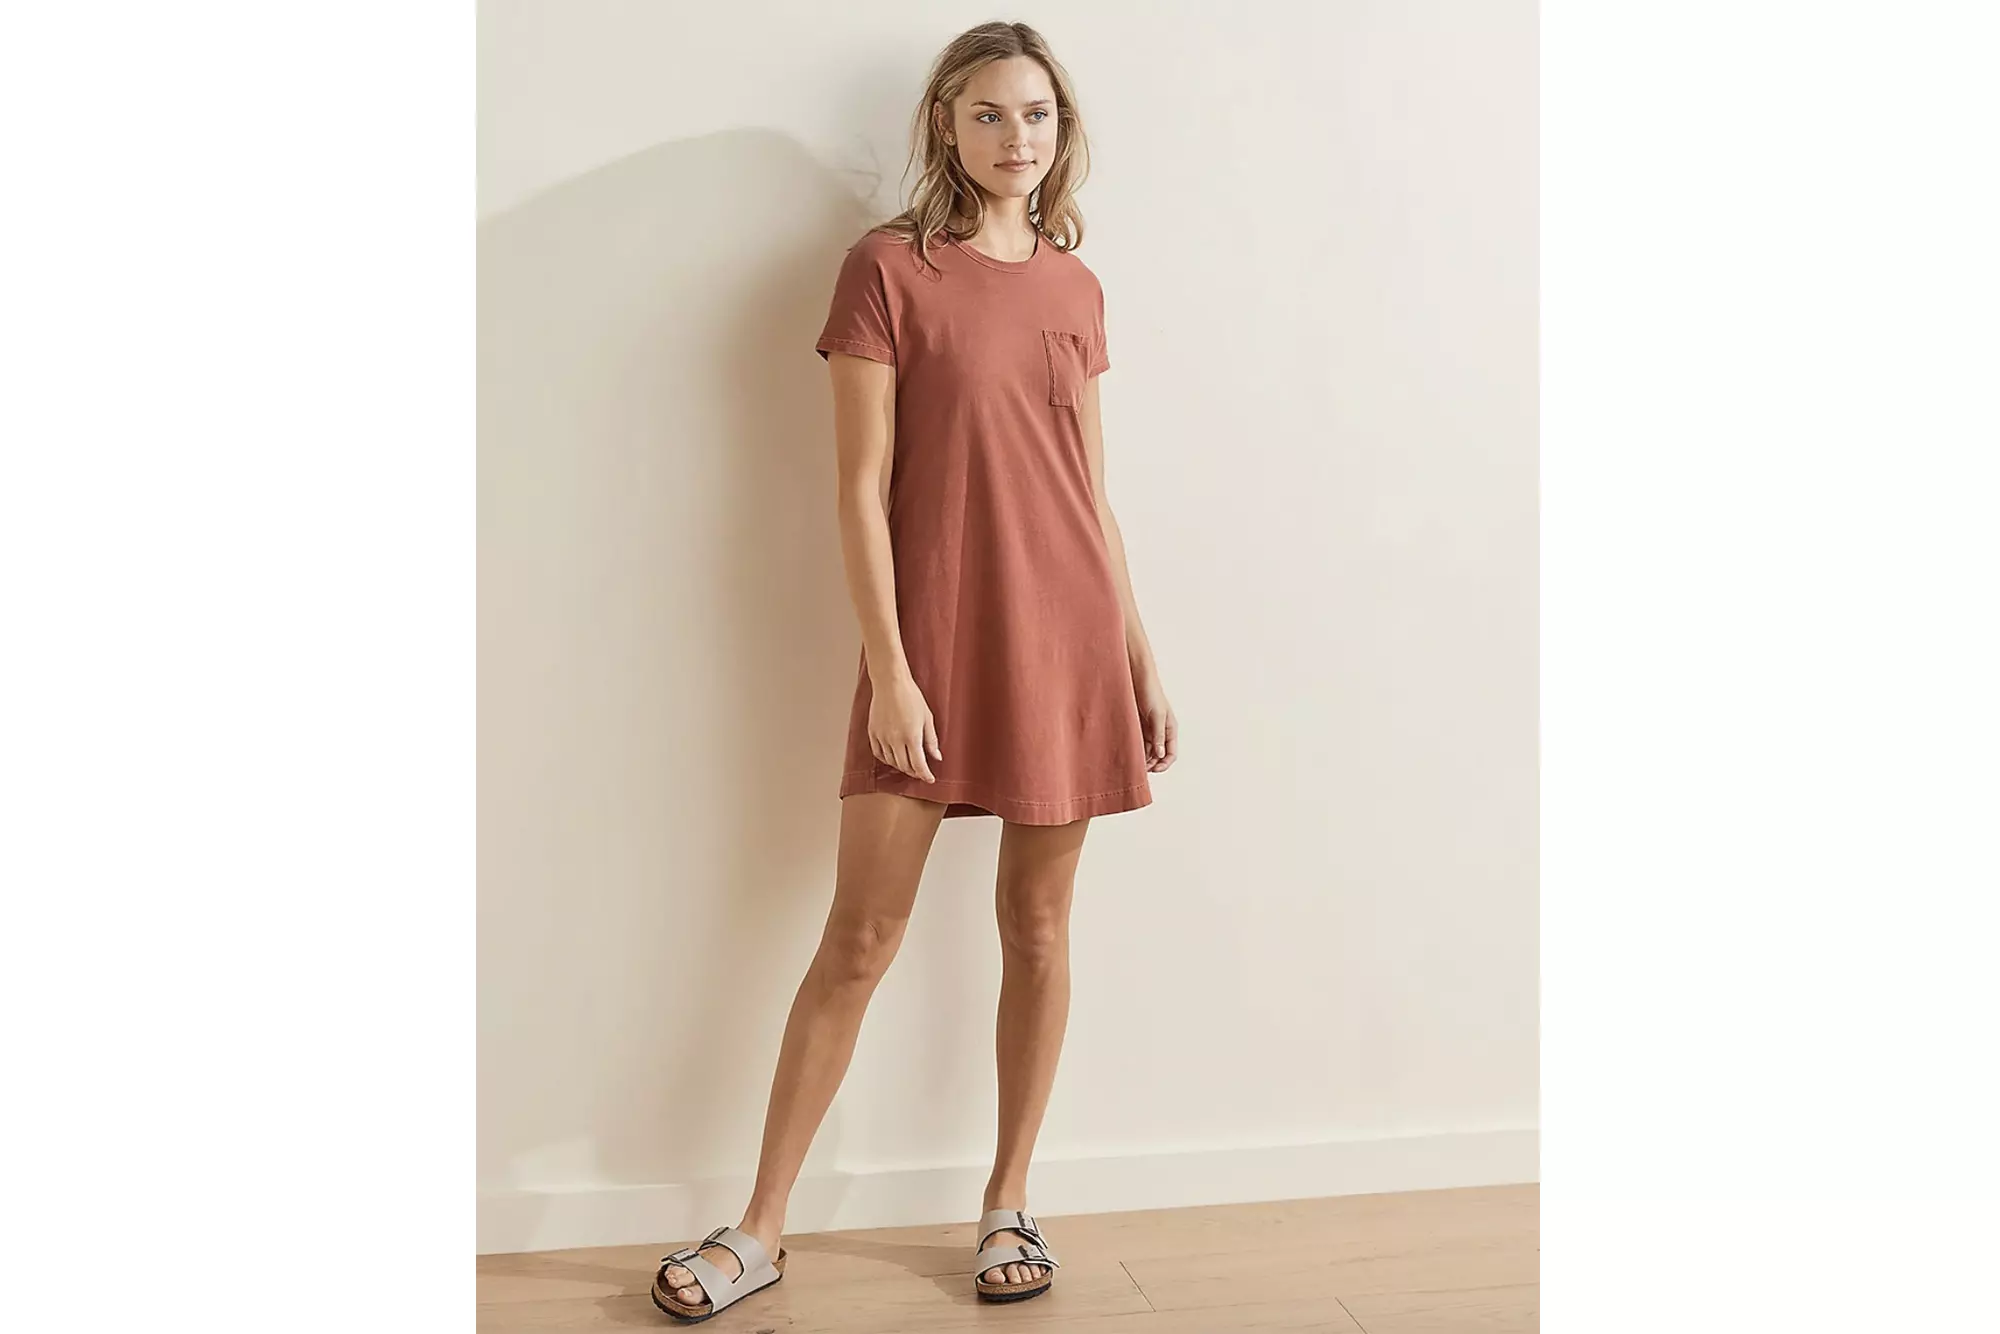 A woman in a red t-shirt dress